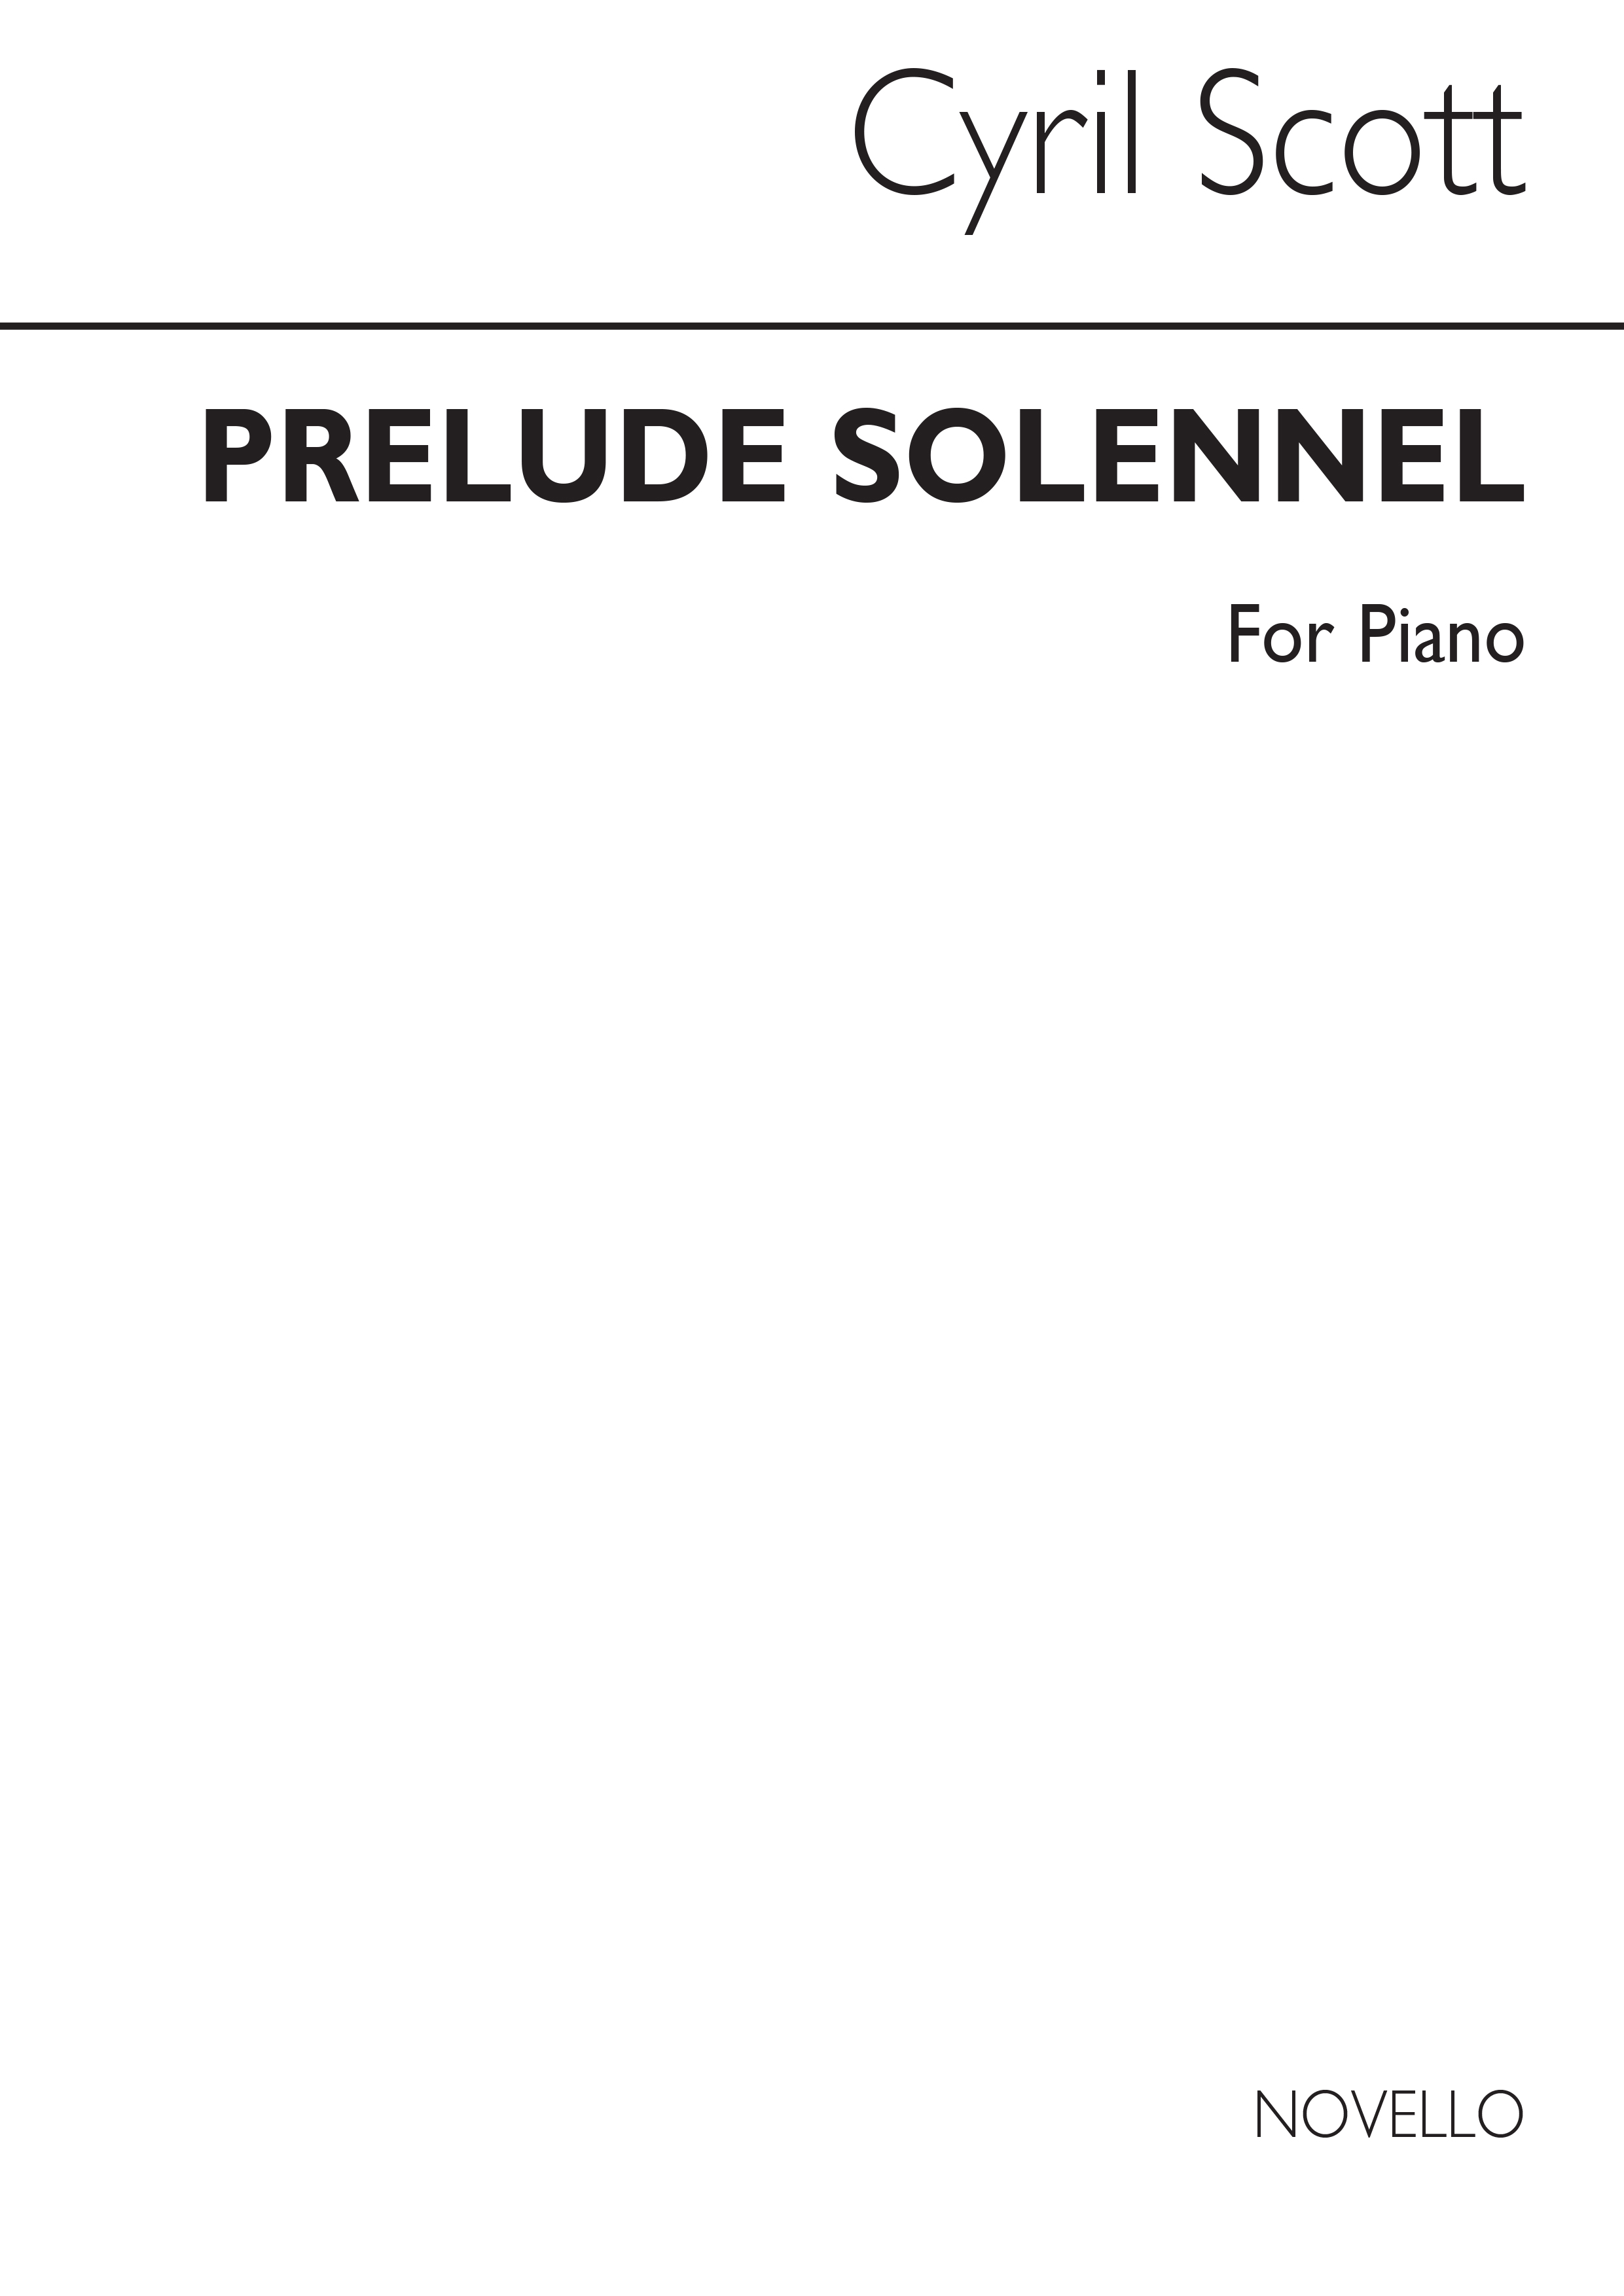 Cyril Scott: Prelude Solennelle